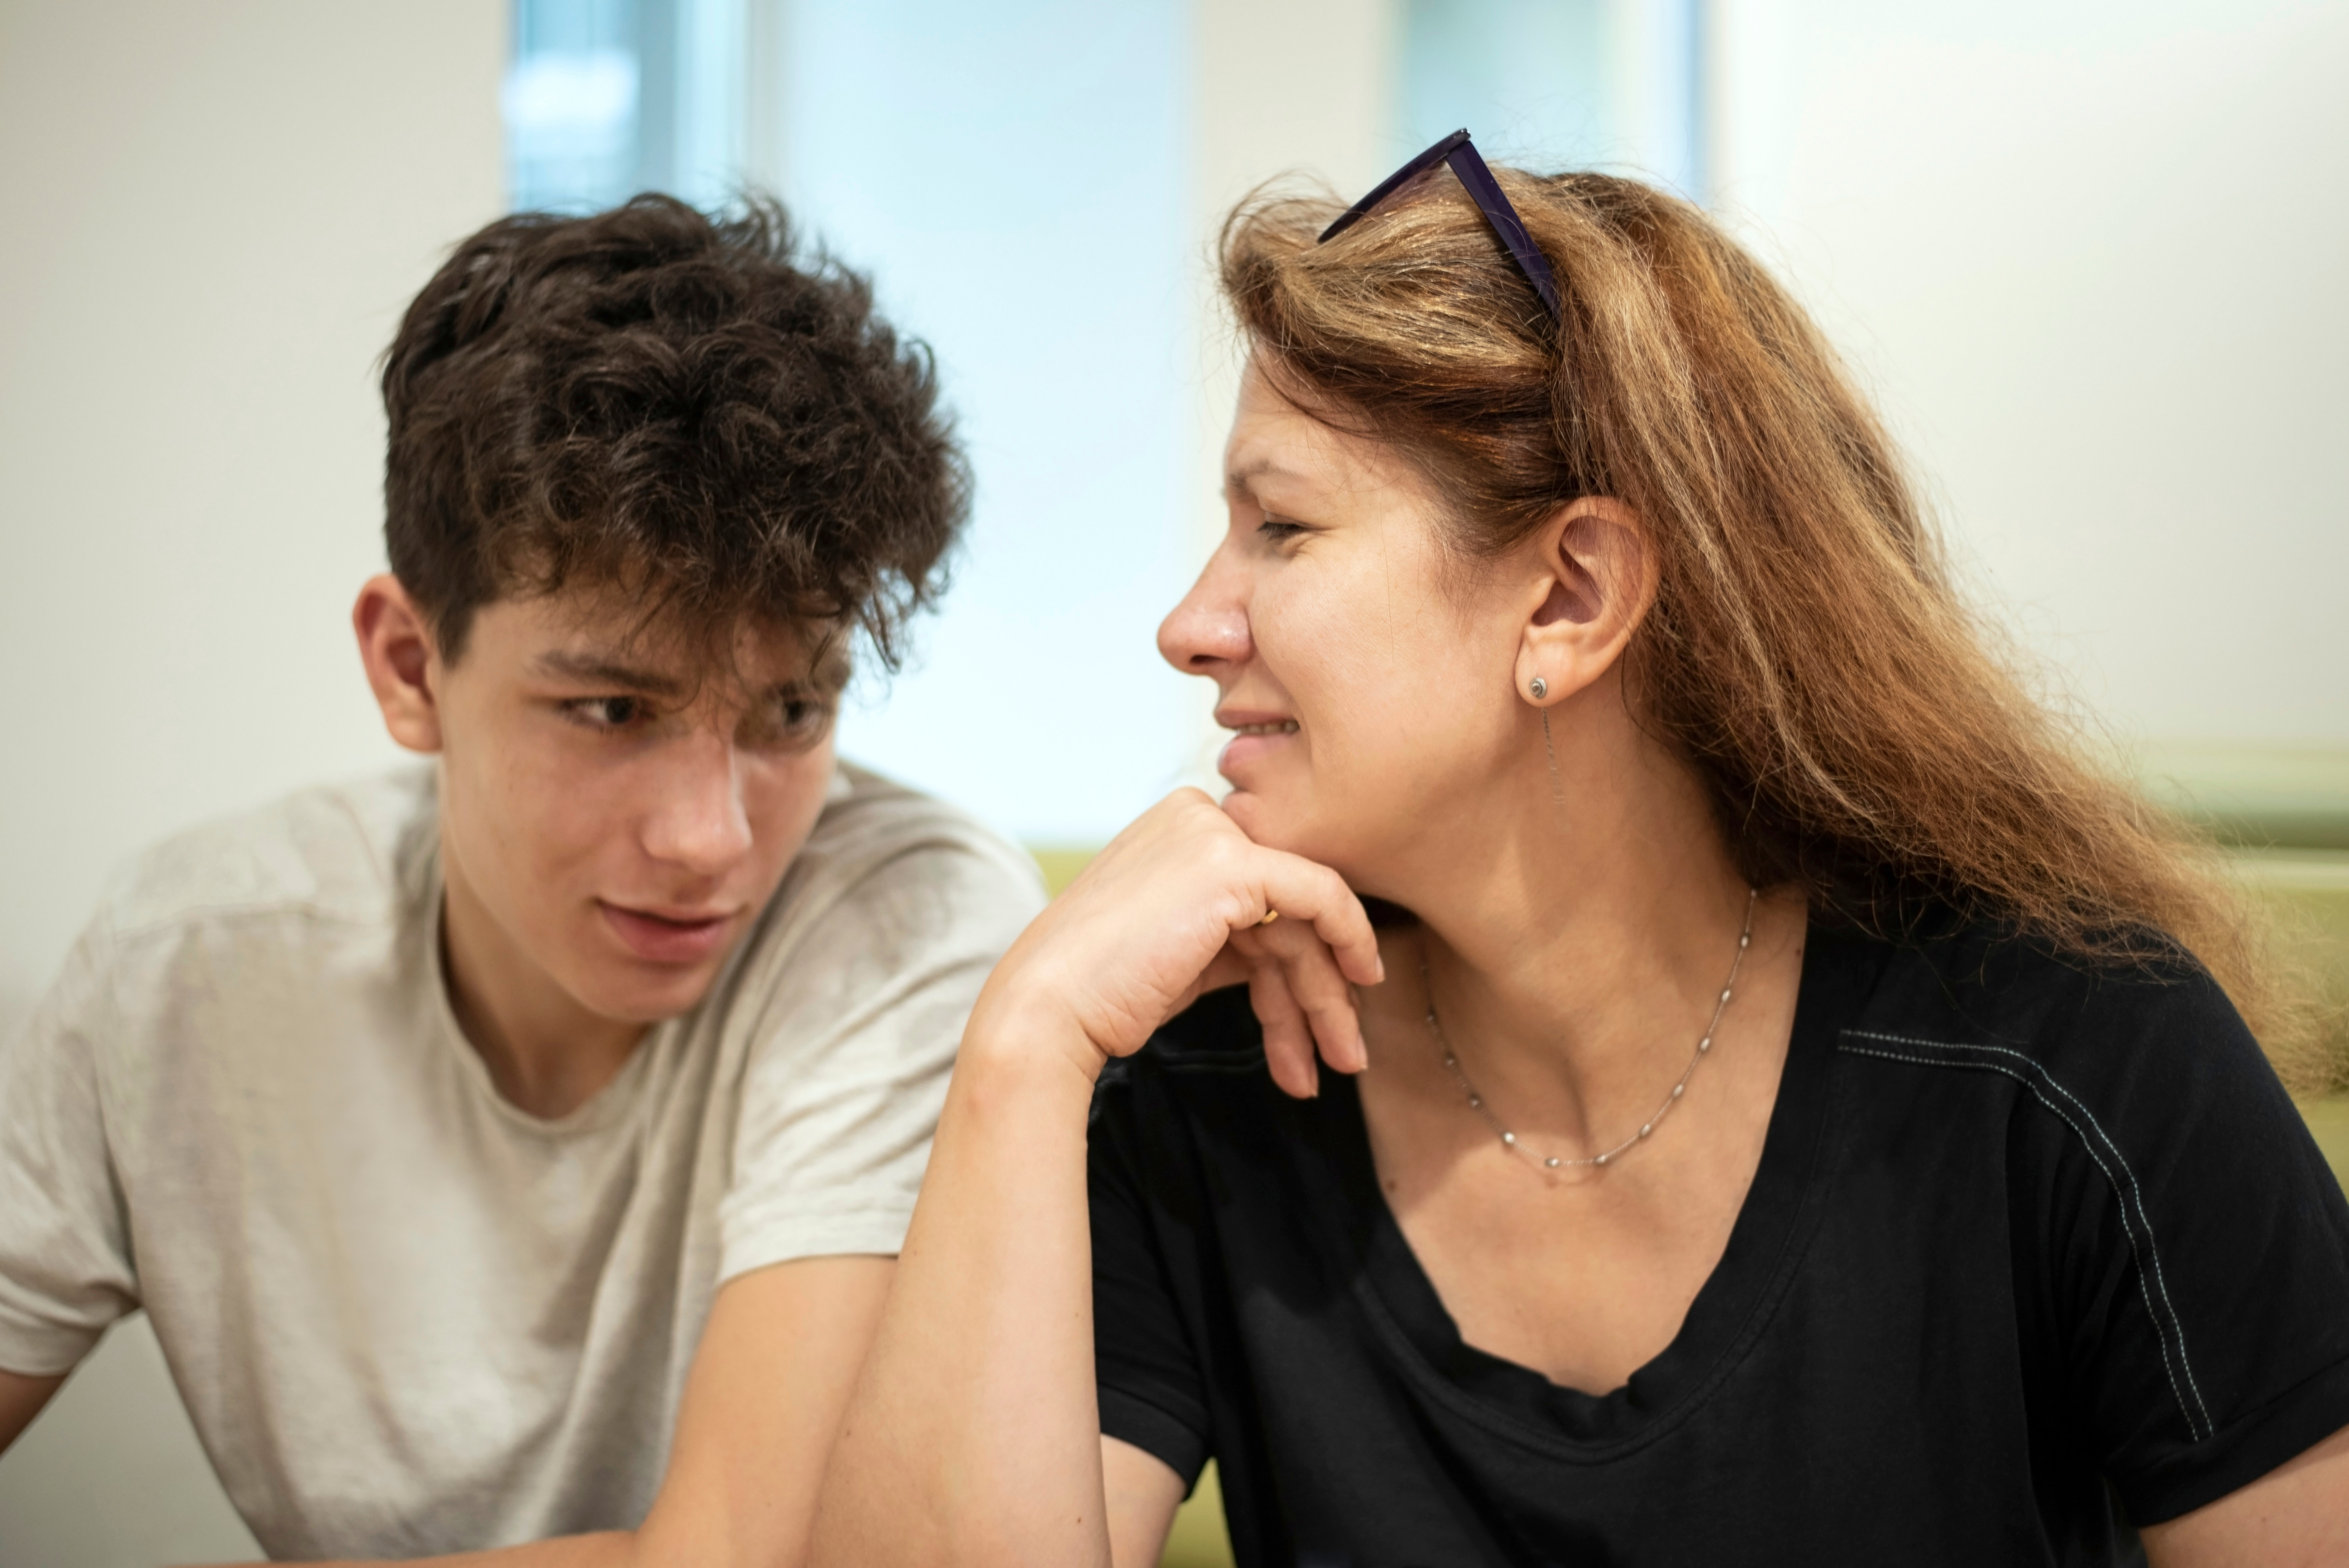 A middle aged woman and a teenage boy talking | Source: Shutterstock